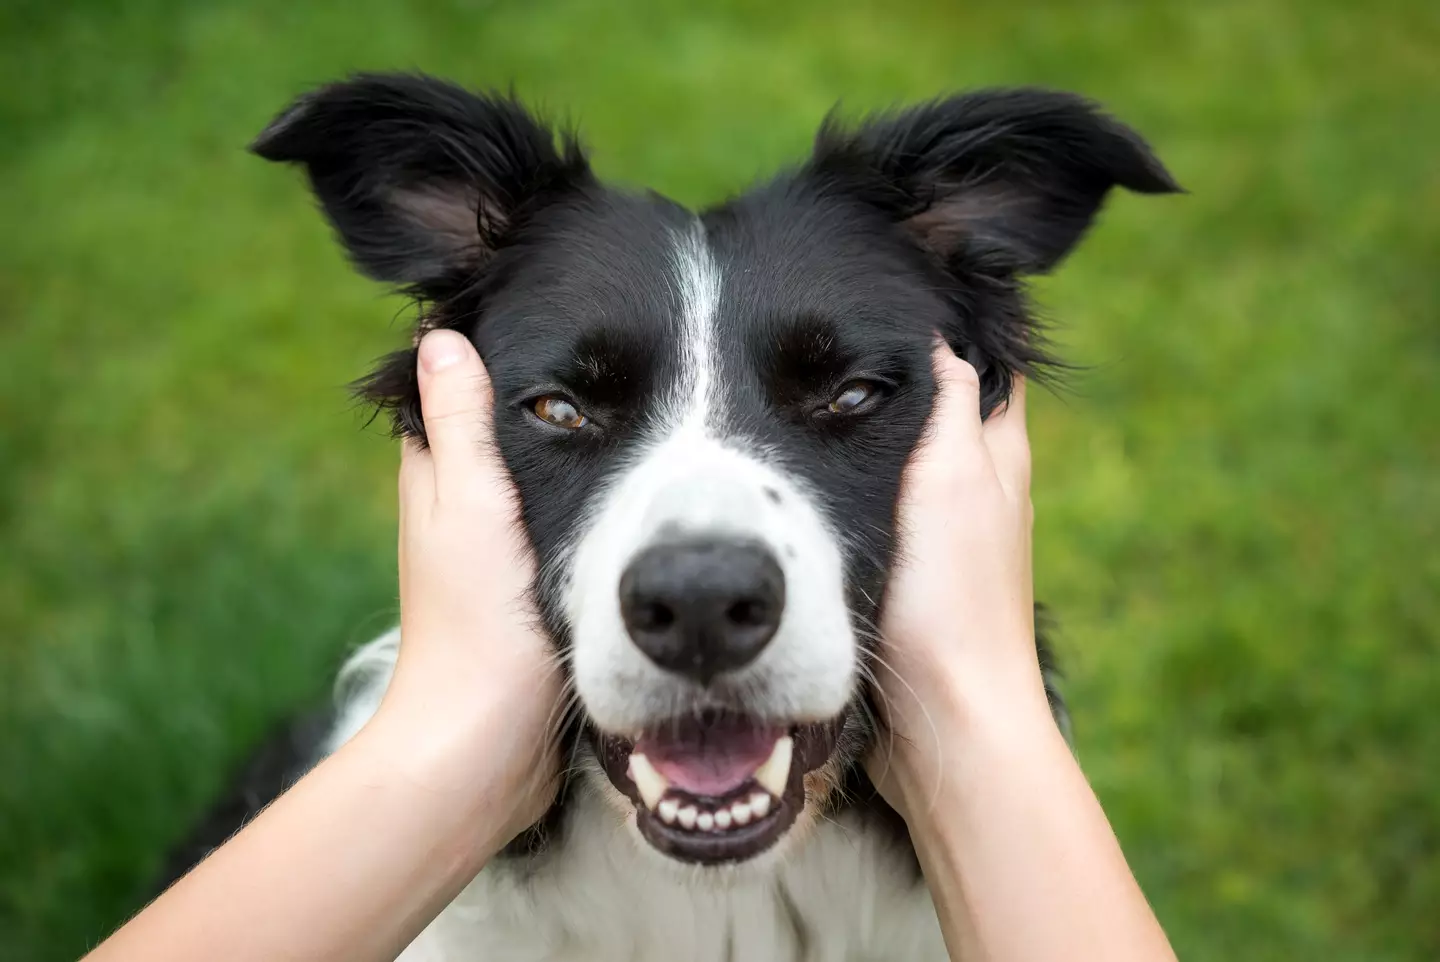 You might think Border Collies are well behaved, but they want to herd things and could start biting kids.